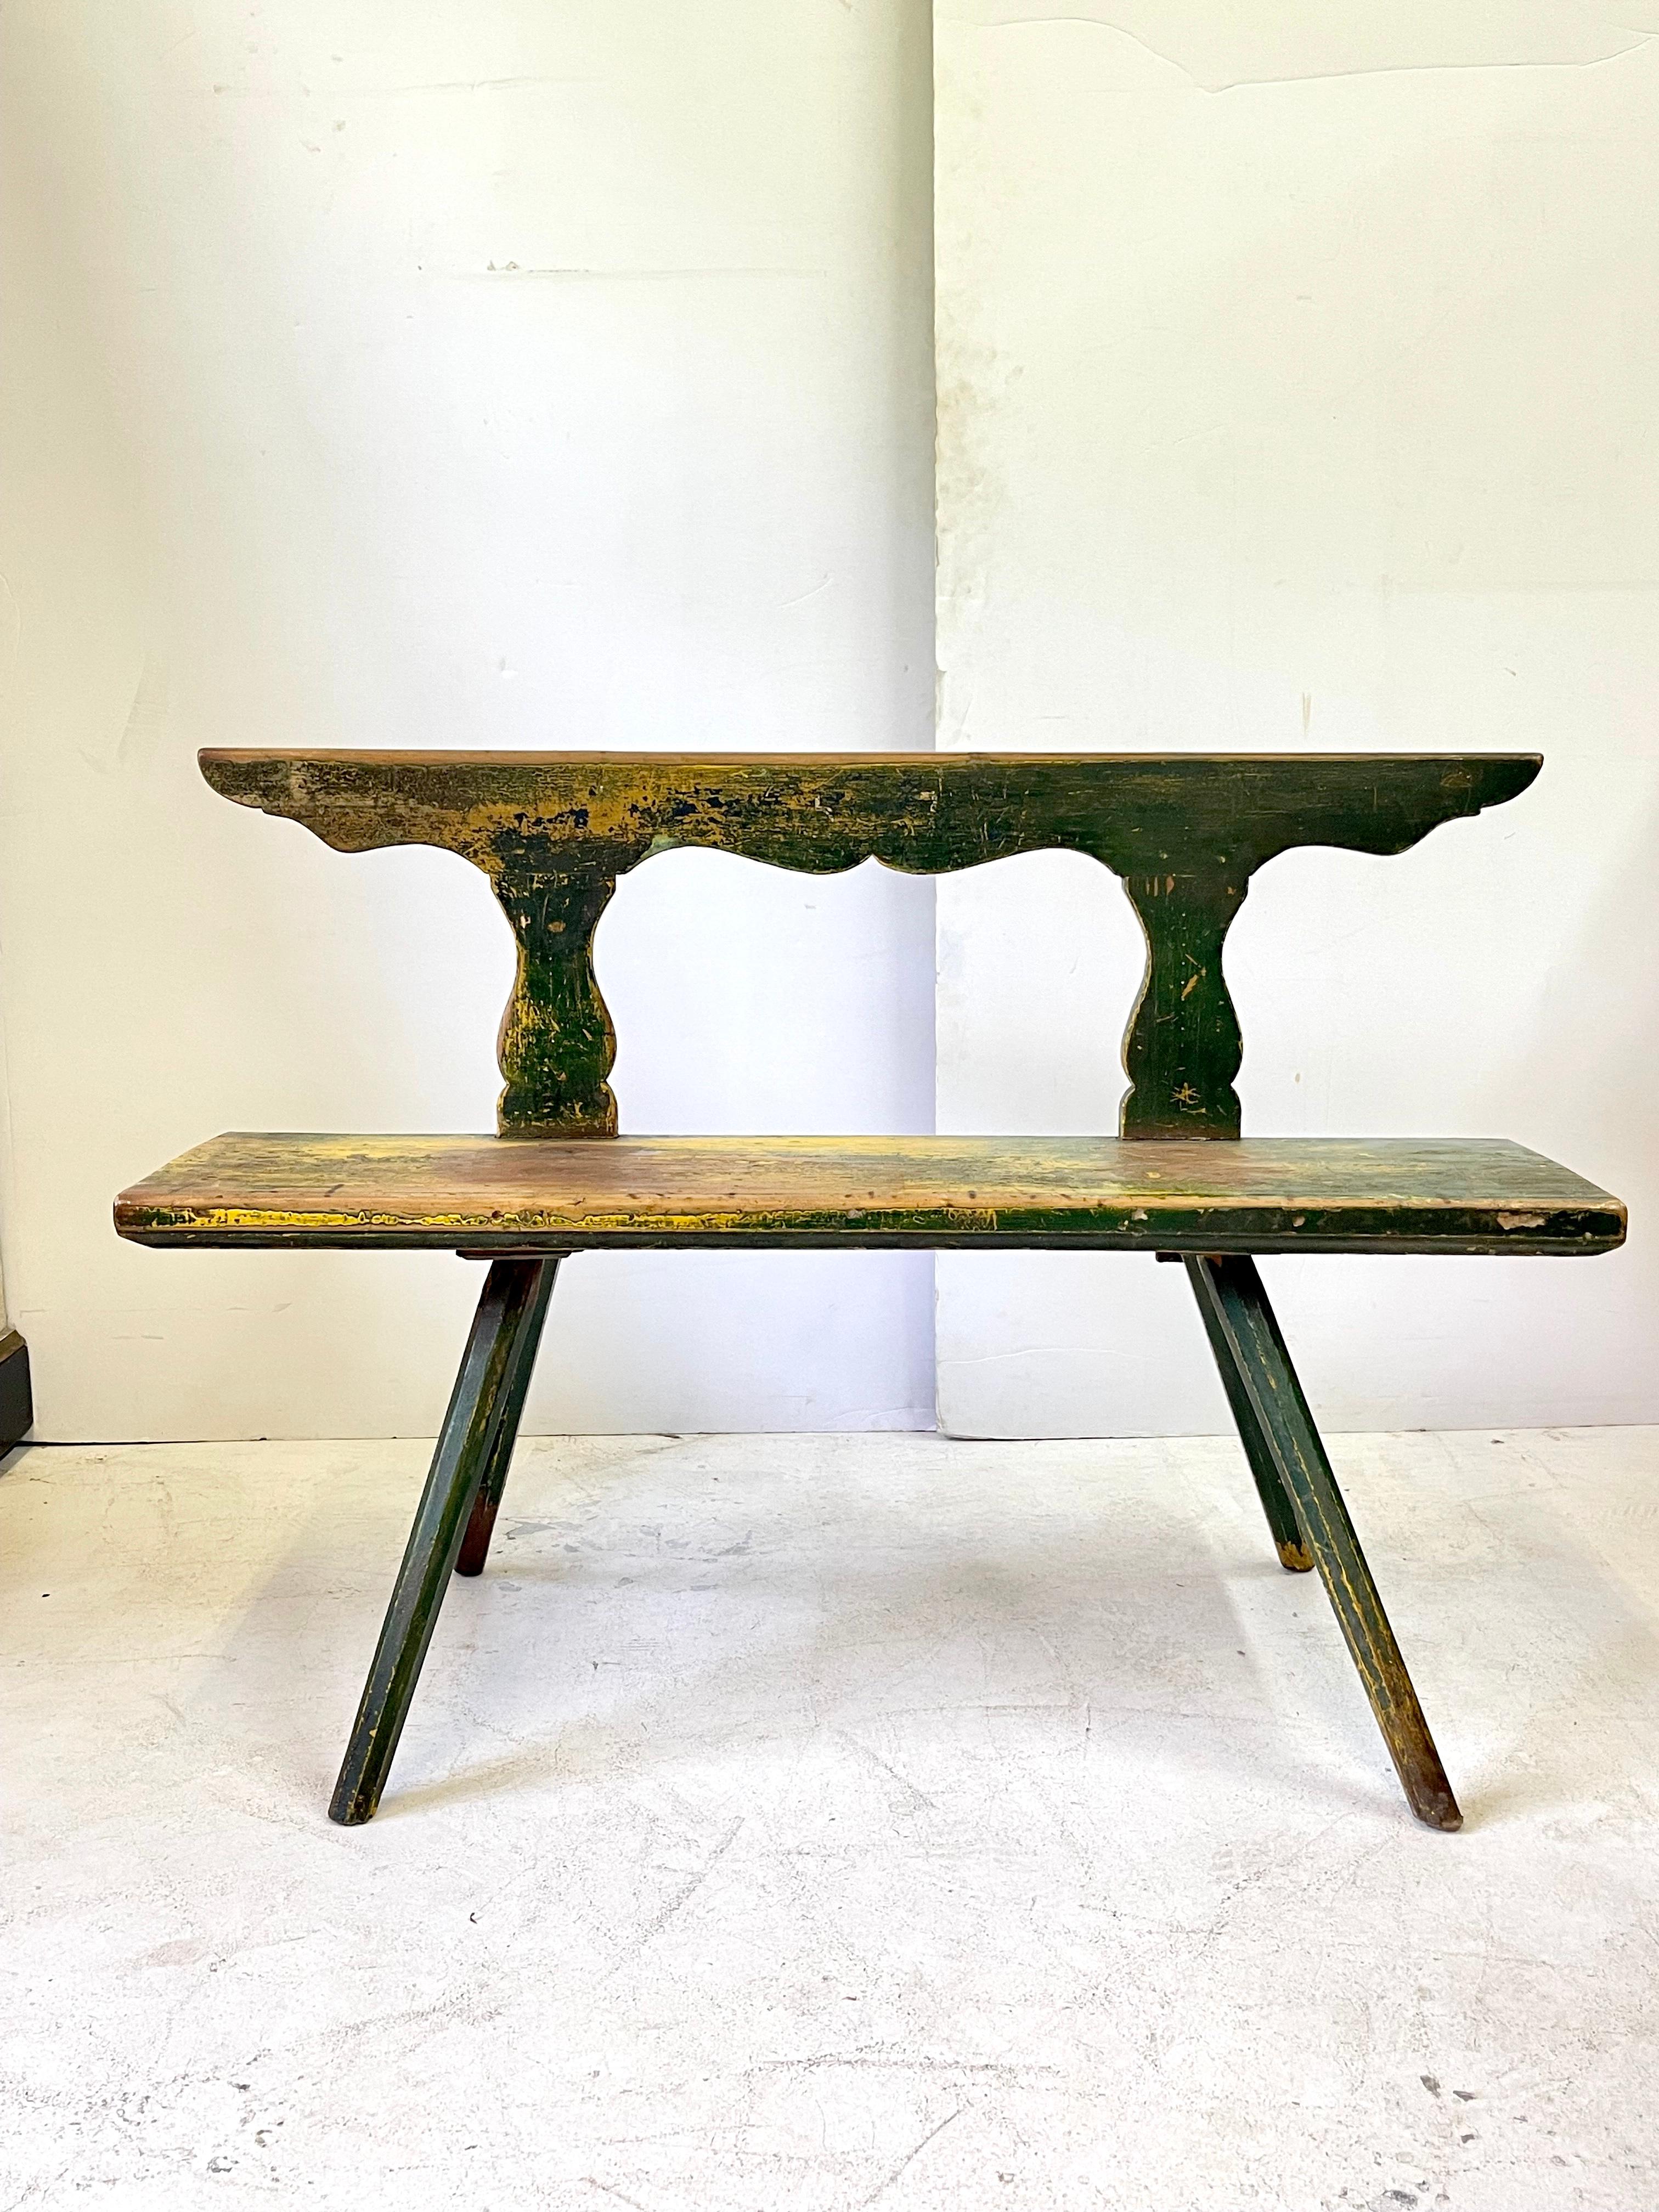 19th Century Italian rustic refrectory settee having a beautifully shaped back, long rectangular bench seat with primitive joinery, and dramatically splayed legs. The settee is now mostly in a dark green paint with a yellow undercolor and the